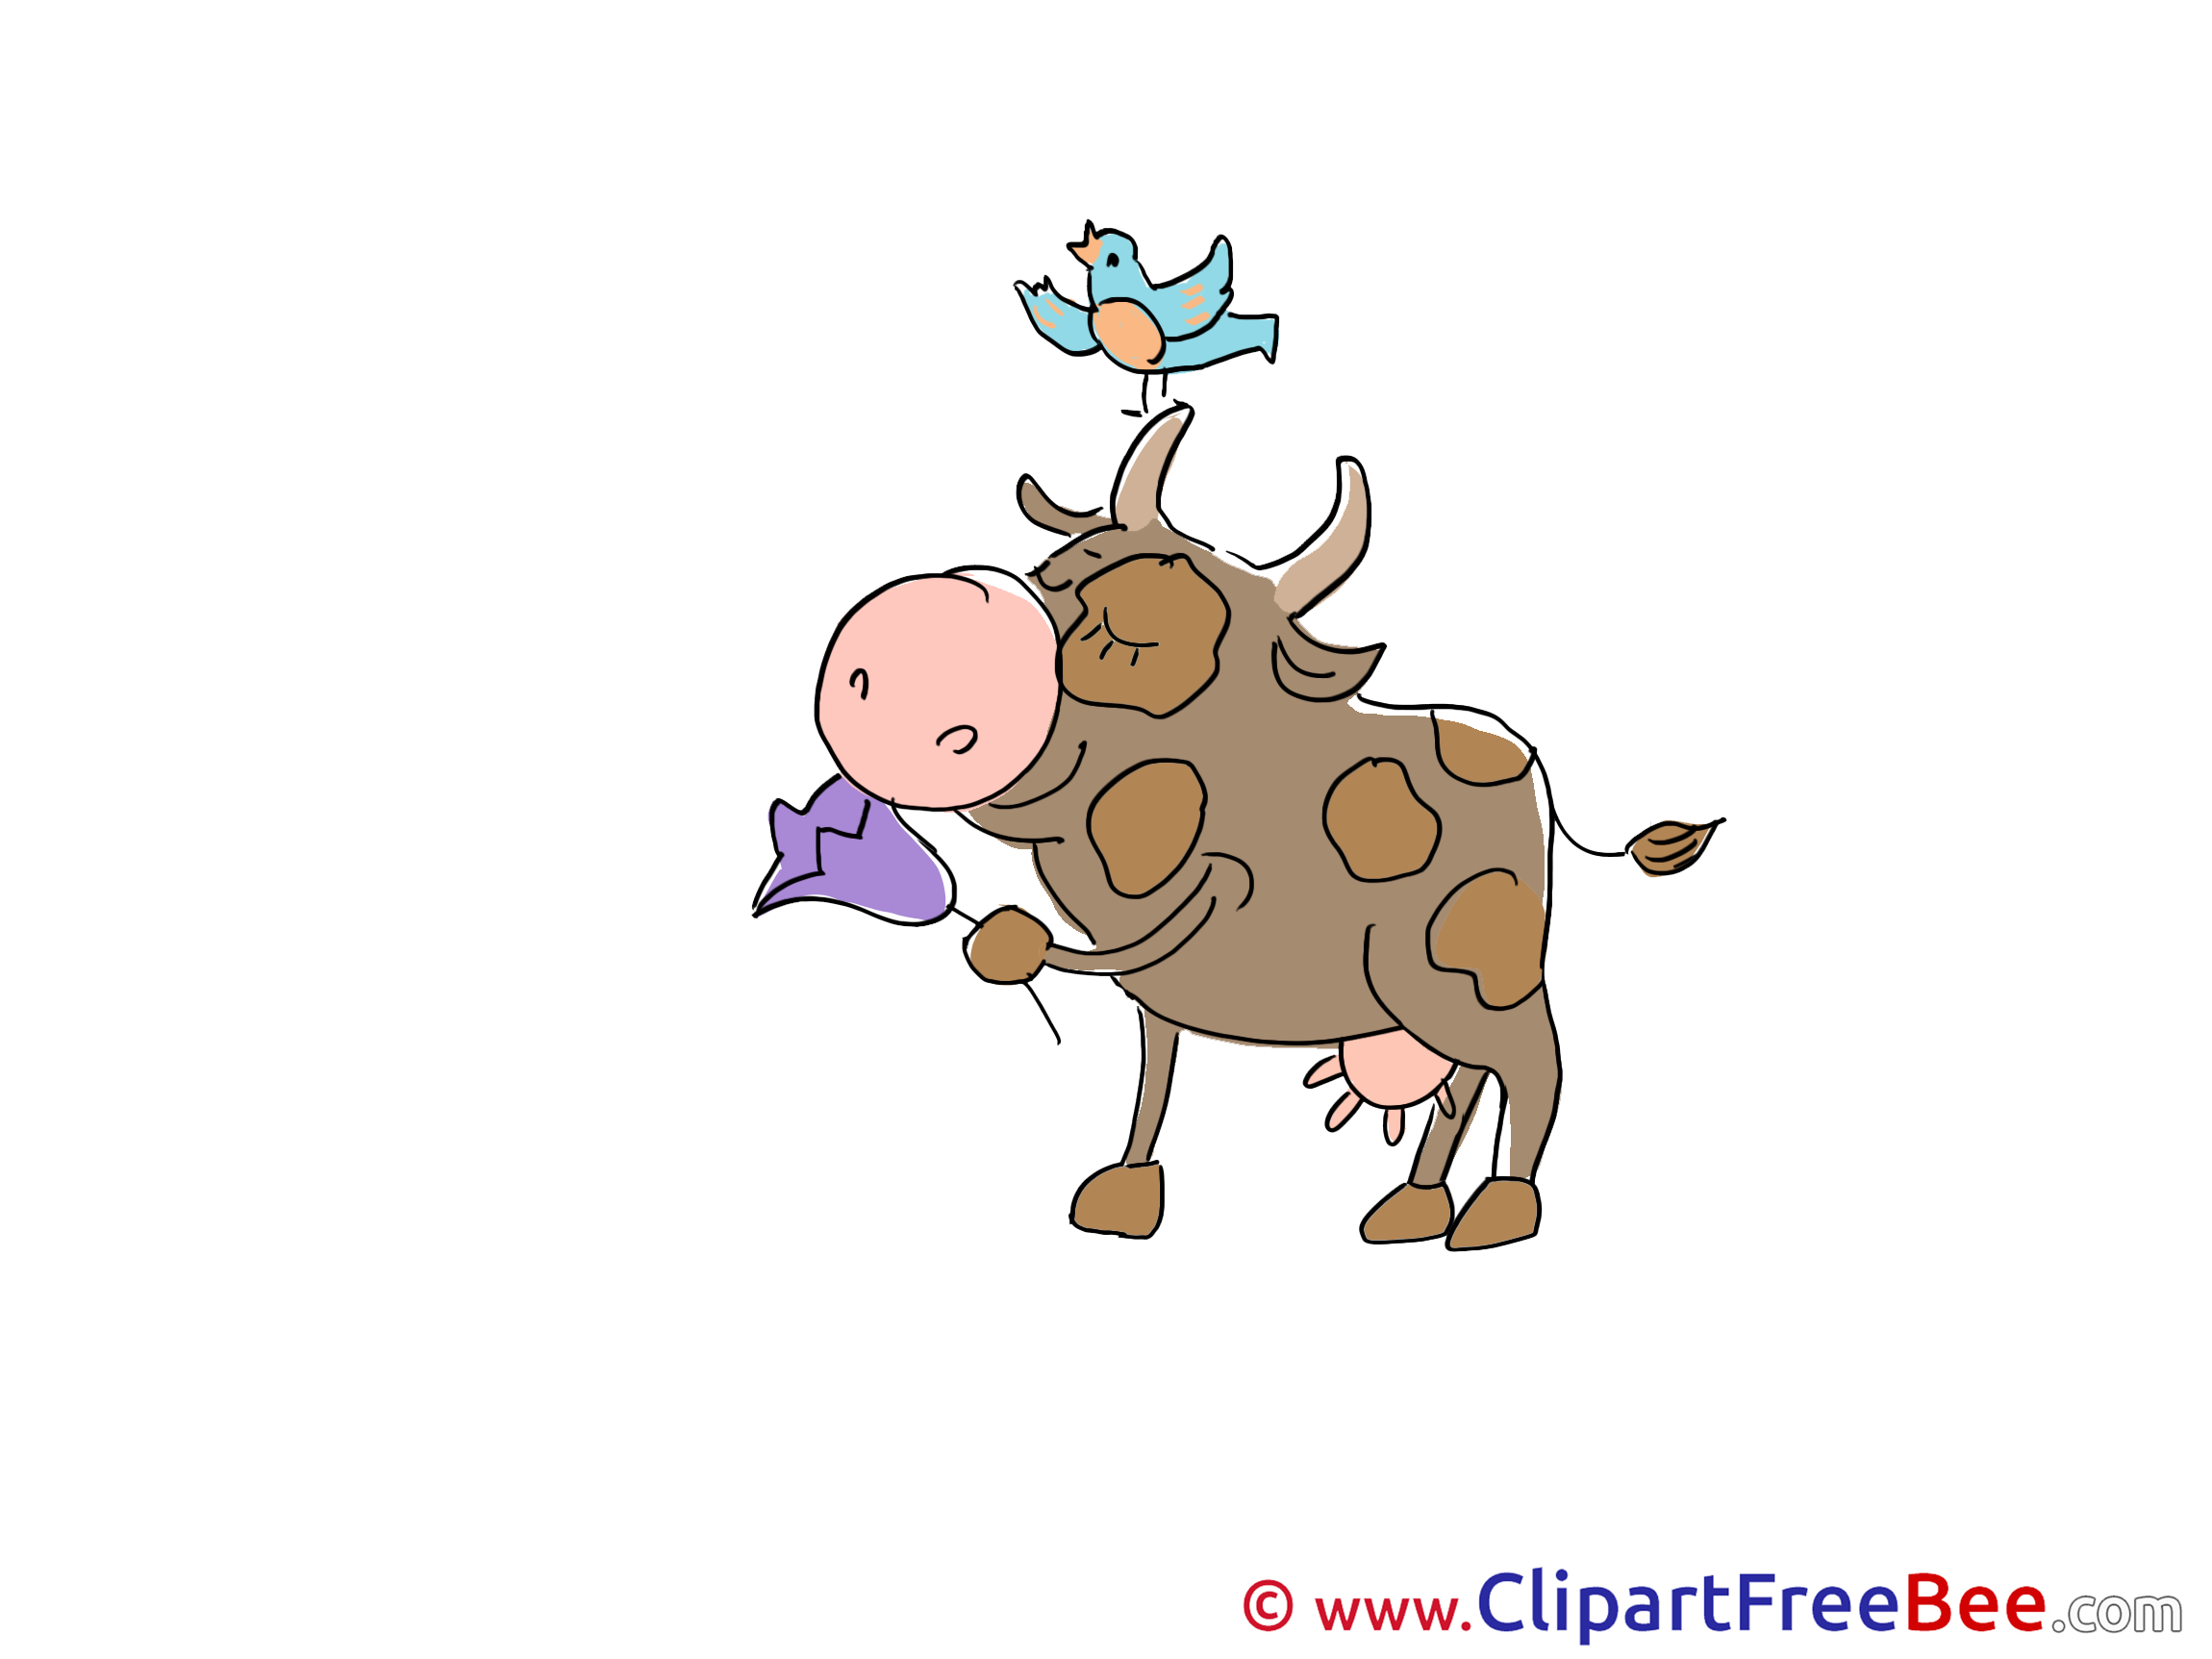 Bird Cow Flower free Cliparts for download